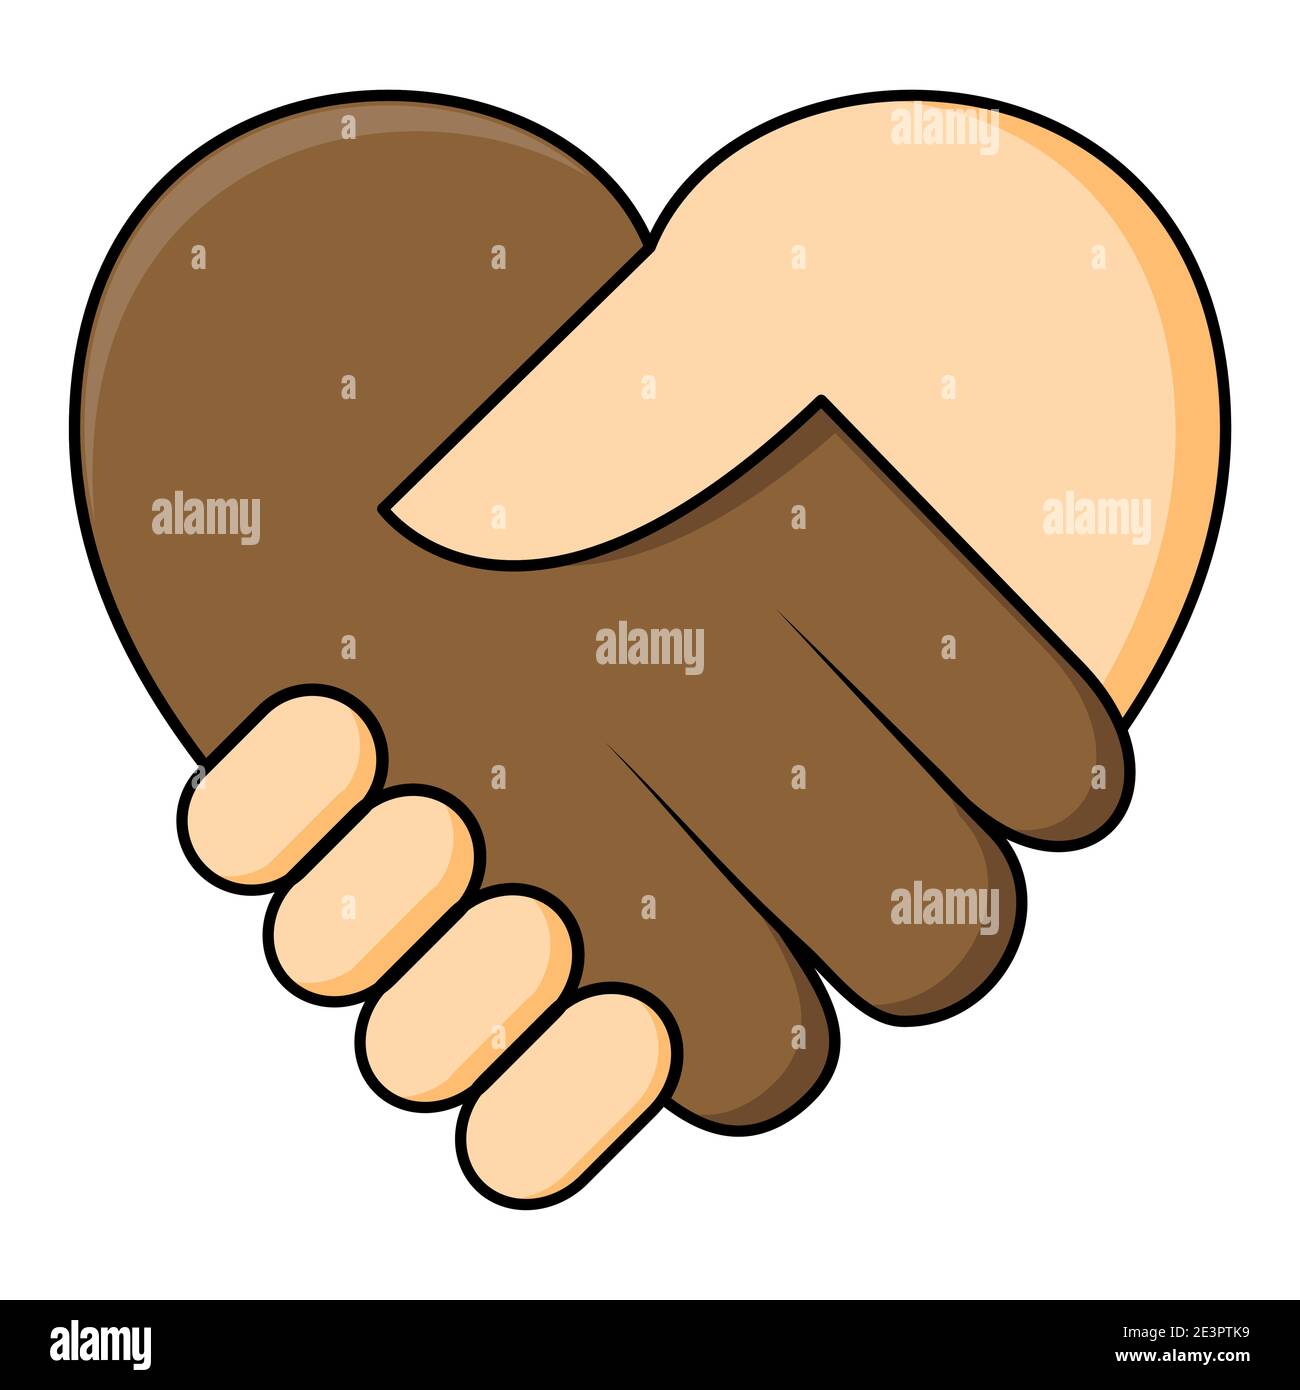 No racism - shake hand in heart shape. Two hands dark and fair skin in a handshake. Equality of races concept icon. Great also for symbol of agreement Stock Vector